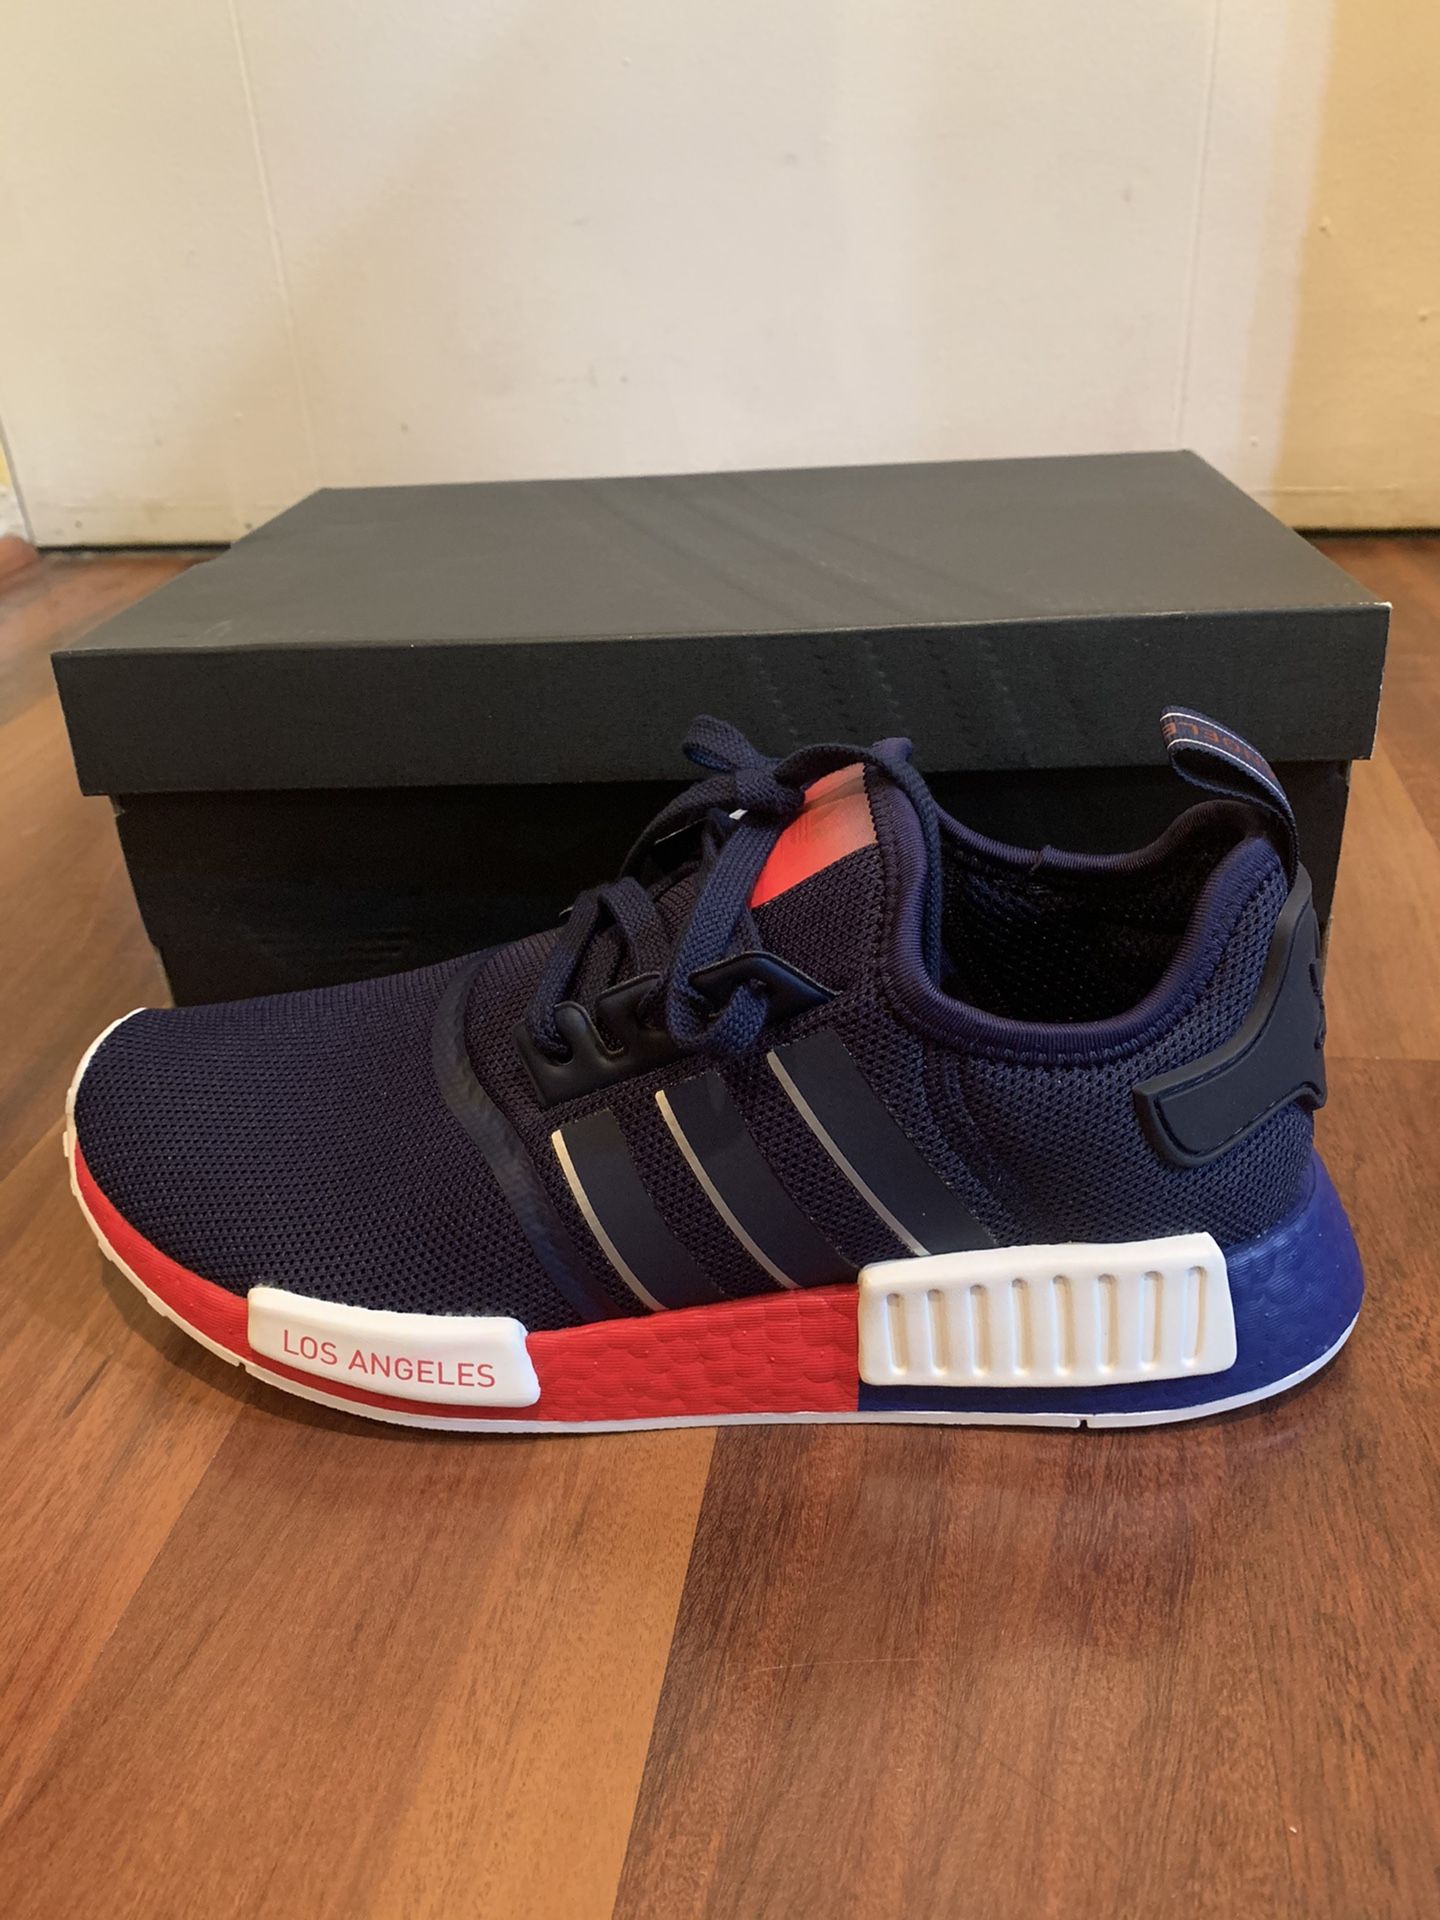 Brand New Adidas NMD R1 Size 9 Never Worn